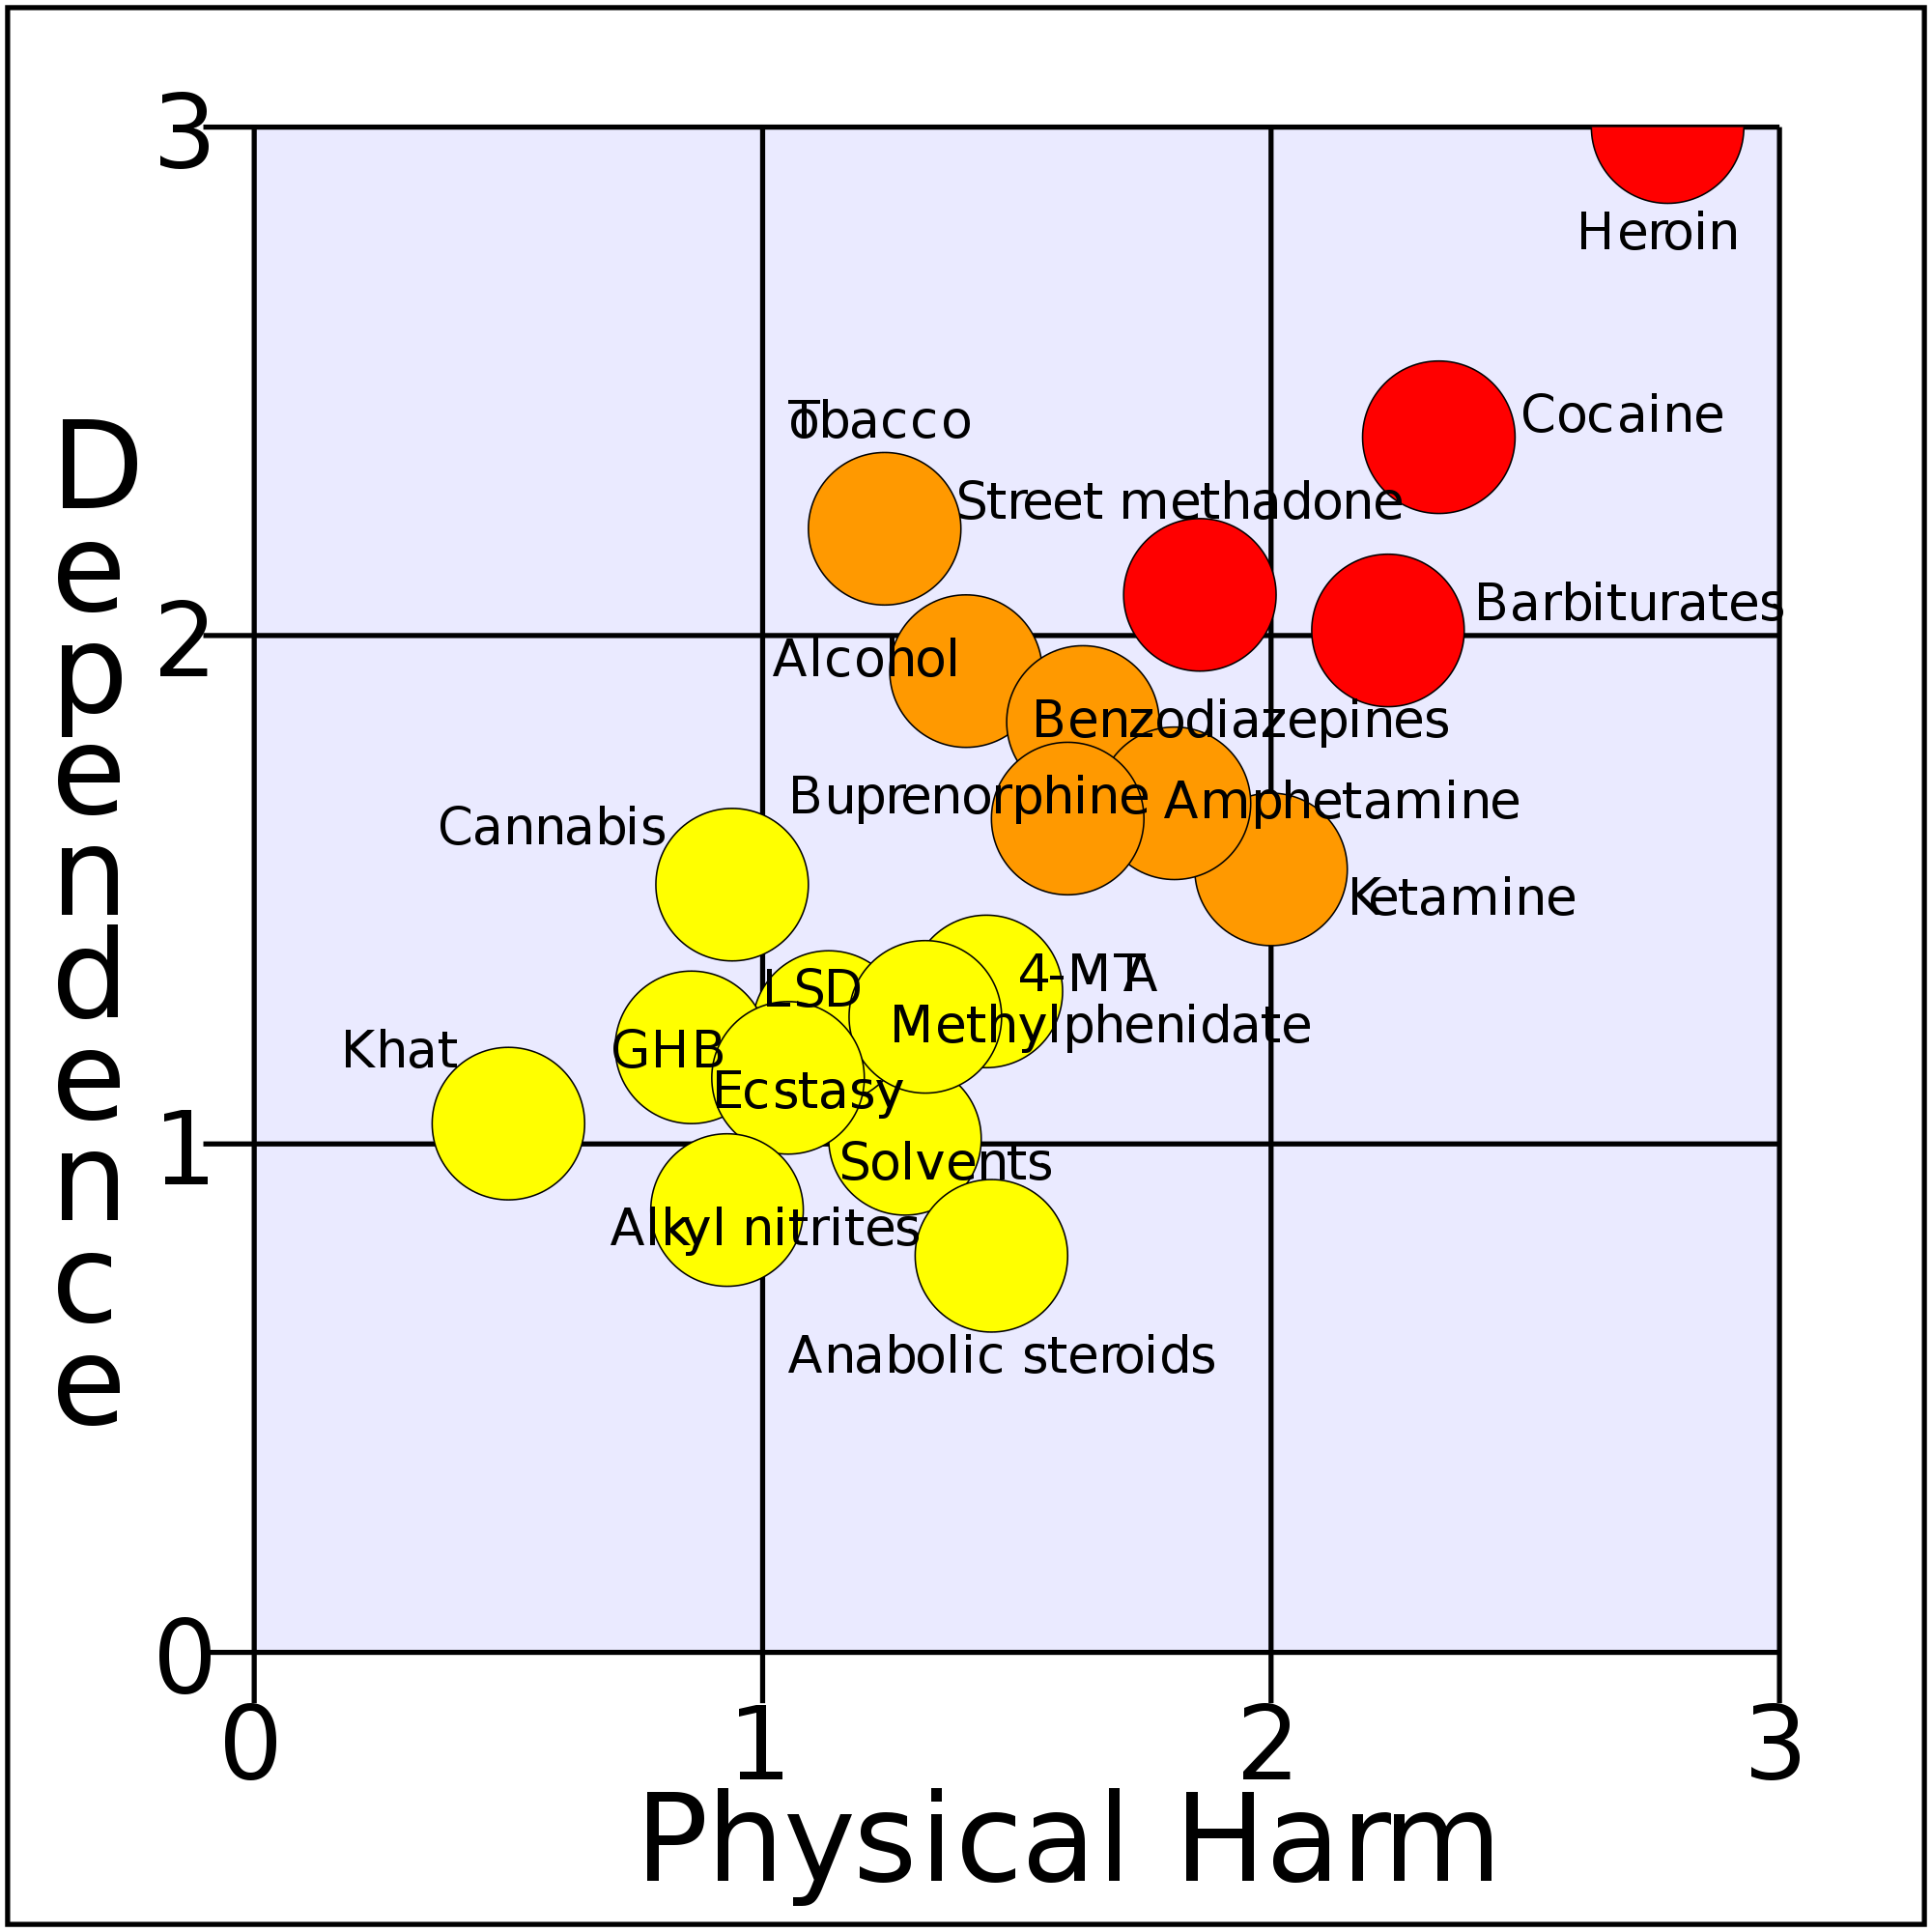 2000px-Development_of_a_rational_scale_to_assess_the_harm_of_drugs_of_potential_misuse_(physical_harm_and_dependence,_NA_free_means).svg.png